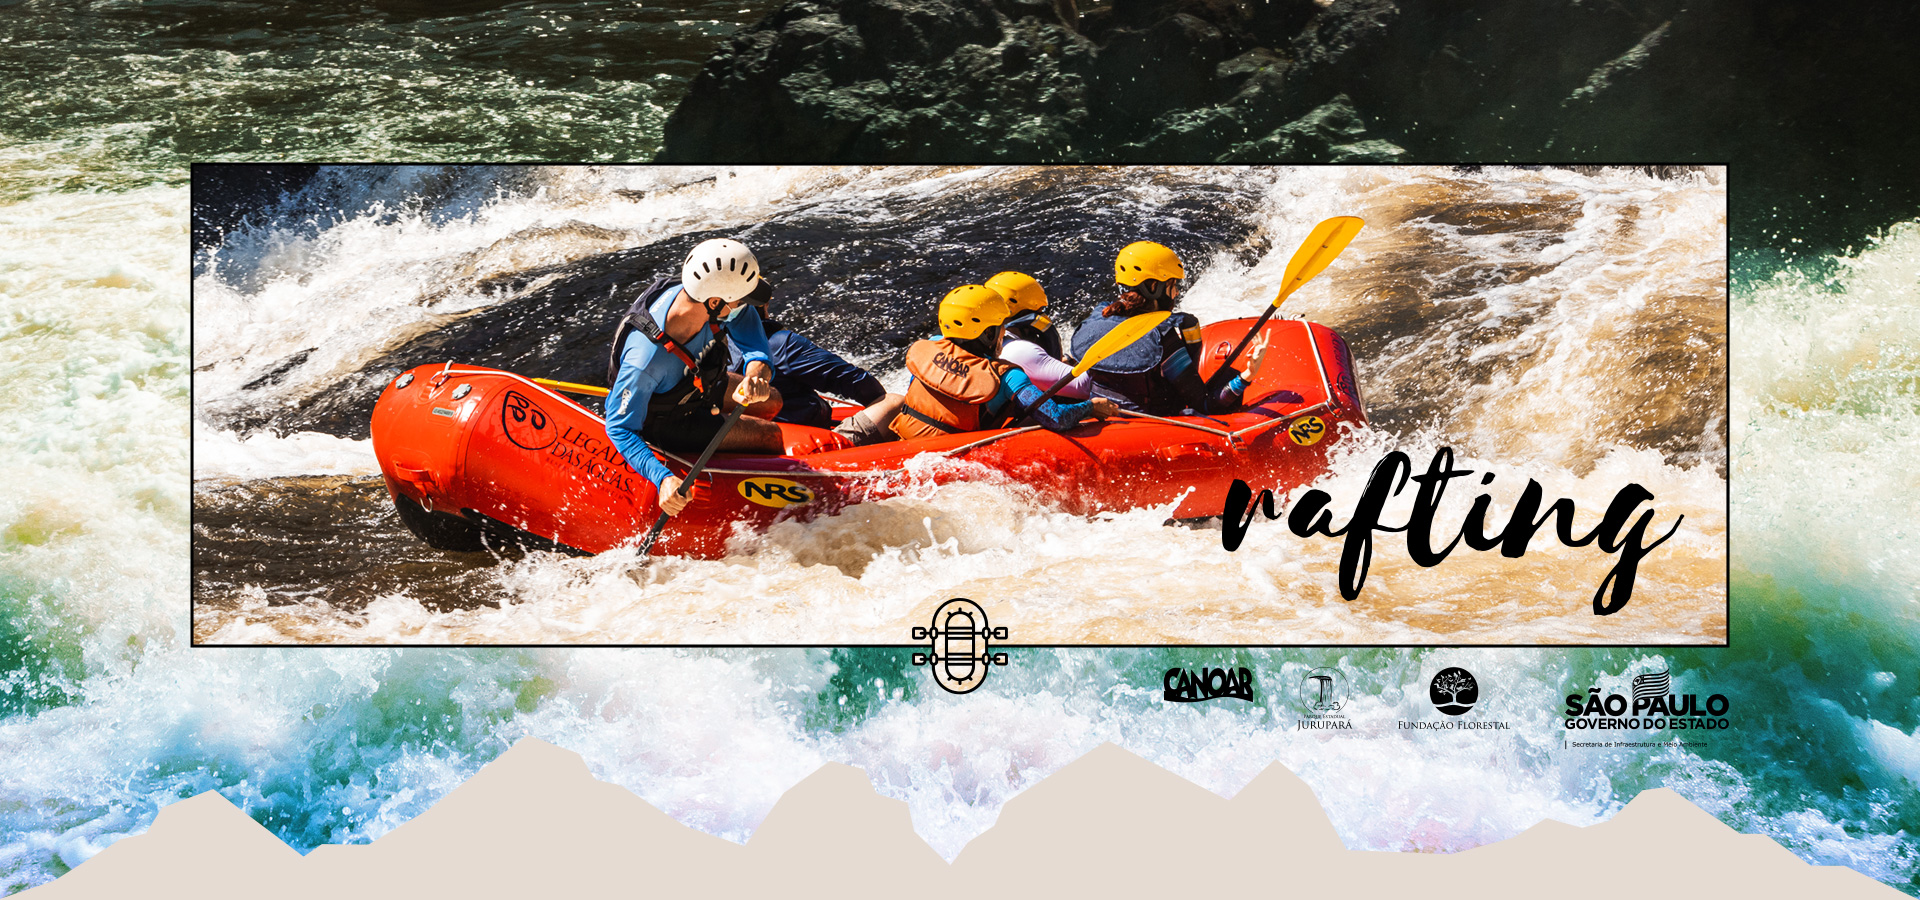 af_rafting_bannerpage_1920x900px-1